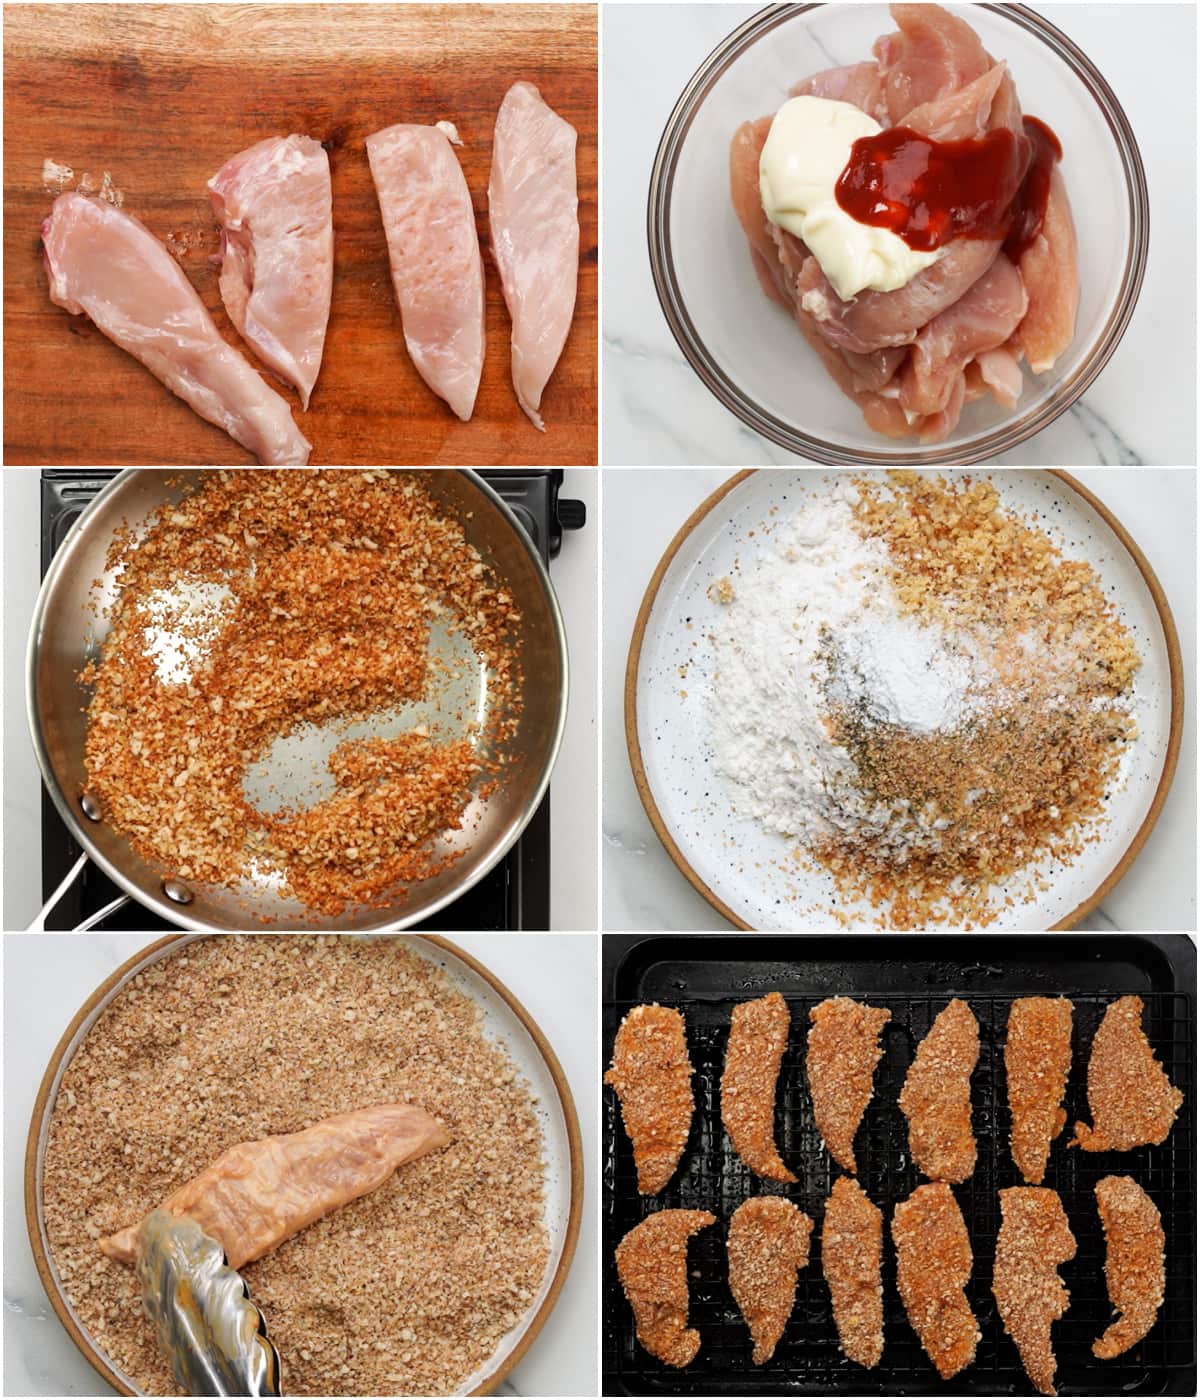 easy and mess free steps to make crispy oven baked chicken thighs. marinate chicken with mayo and sriracha. dredge with breadcrumb, flour, baking soda and seasoning. then bake. 